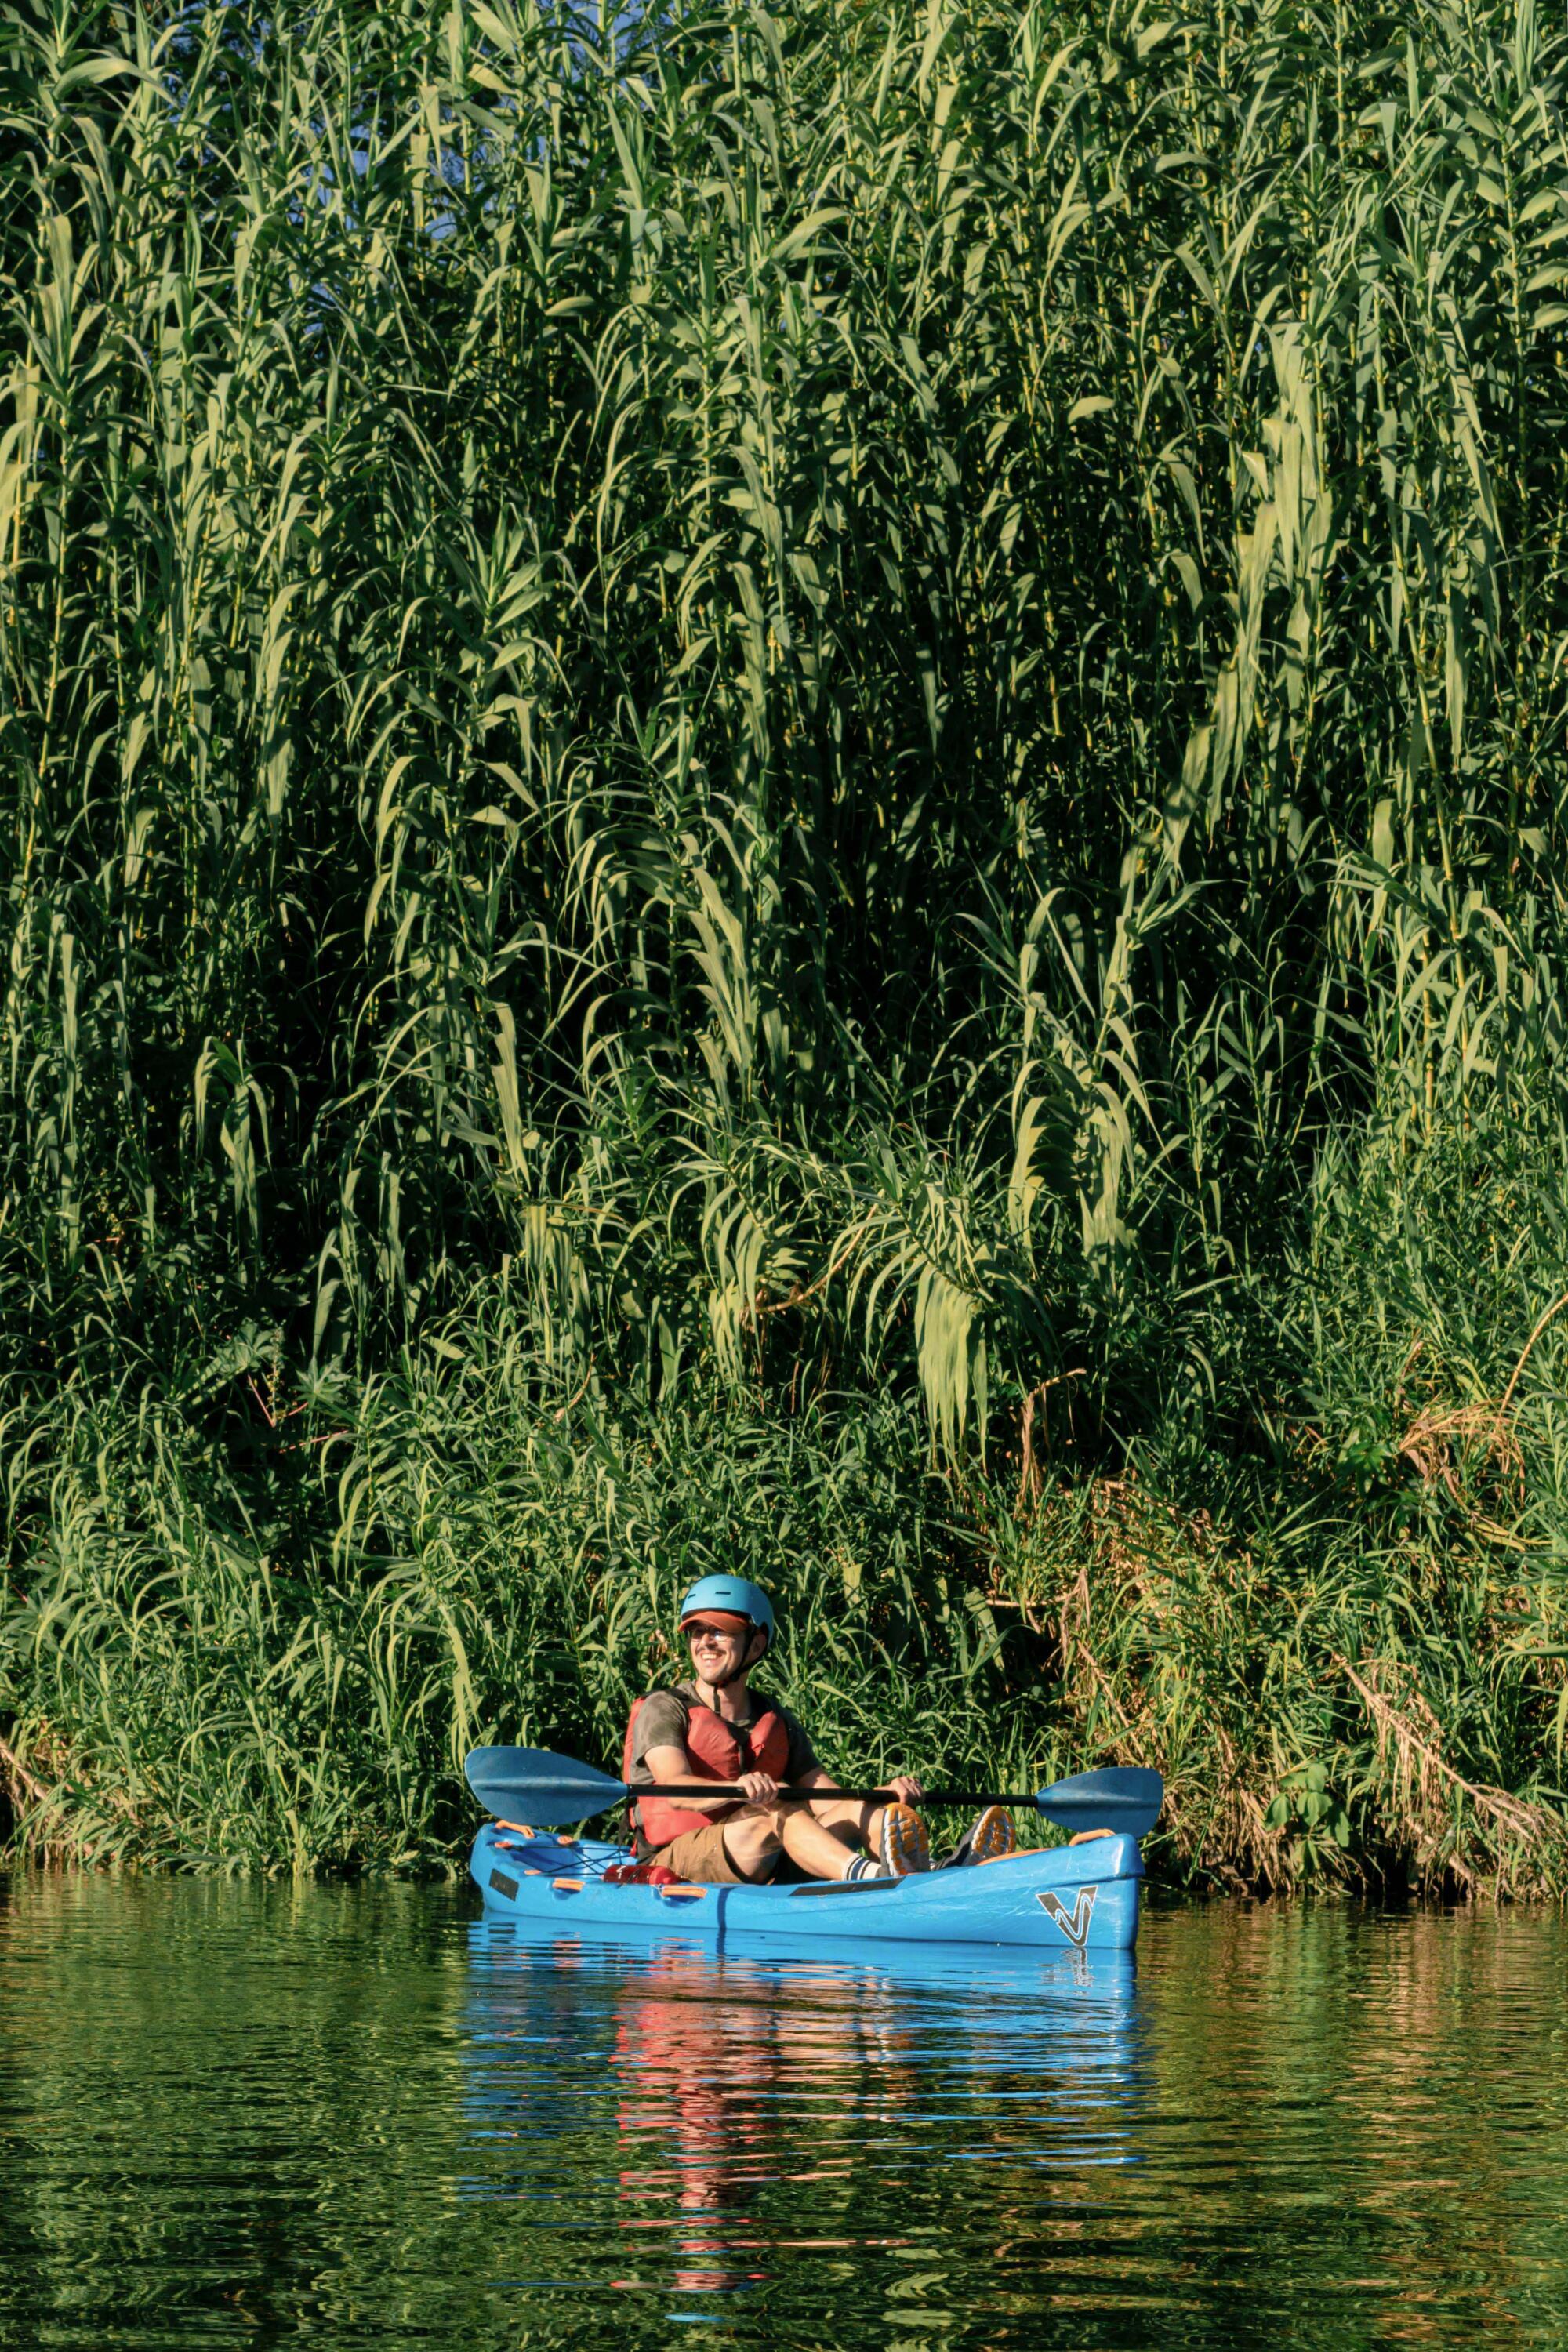 A man sits in a kayak in front of some trees.